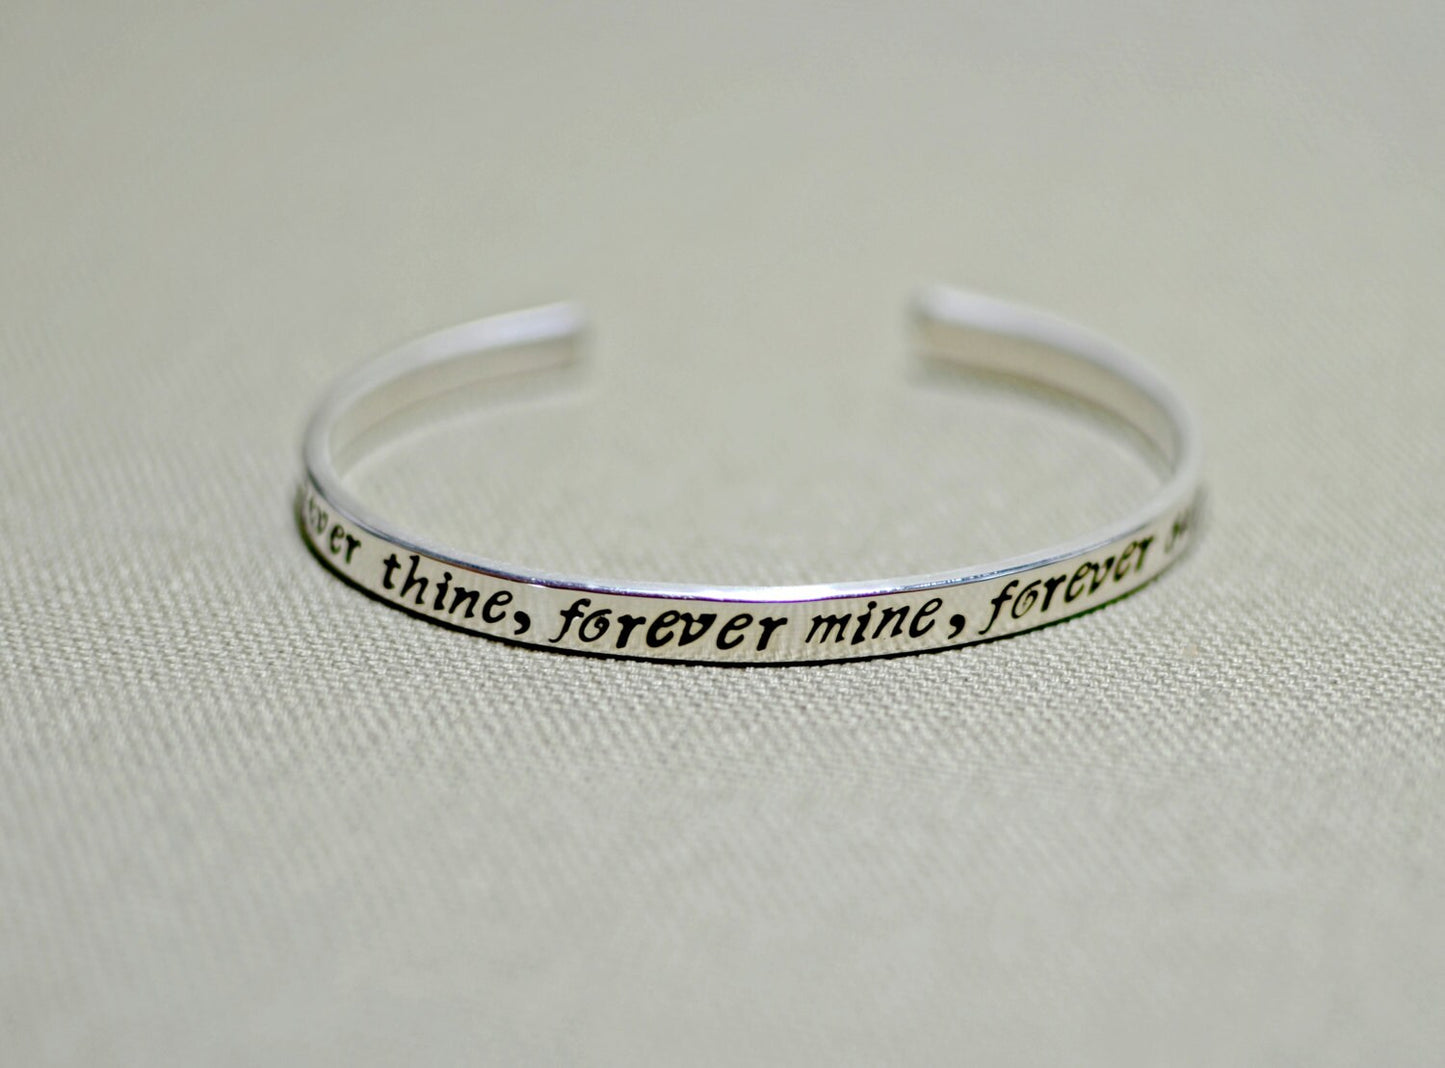 Forever thine forever mine forever ours on polished sterling silver cuff bracelet